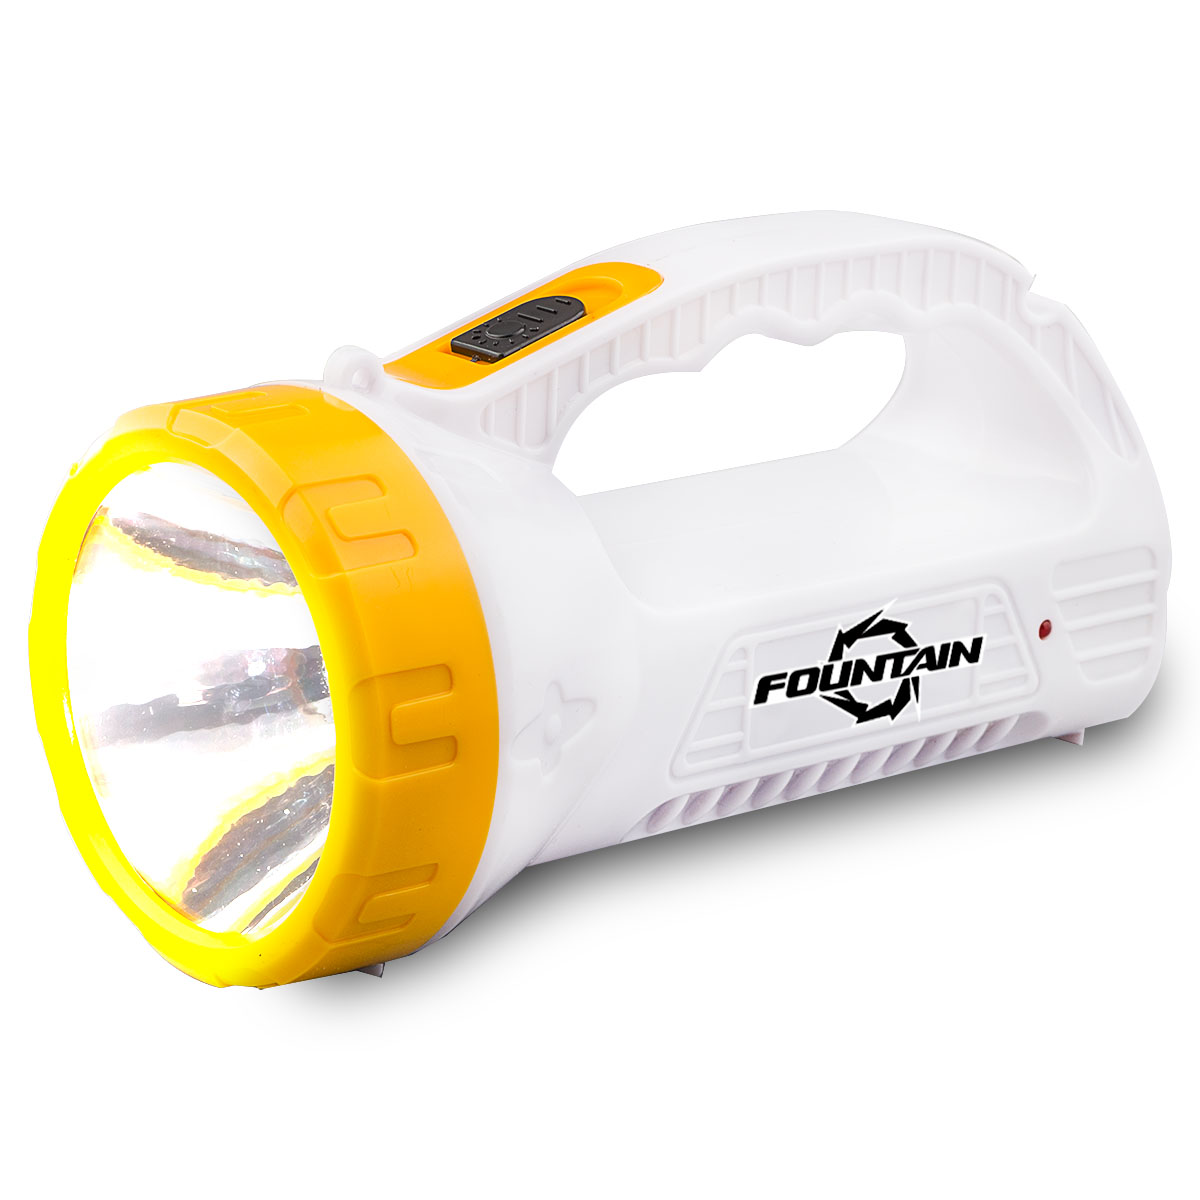 DUAL LED EMERGENCY RECHARGEABLE SPOT LIGHT 